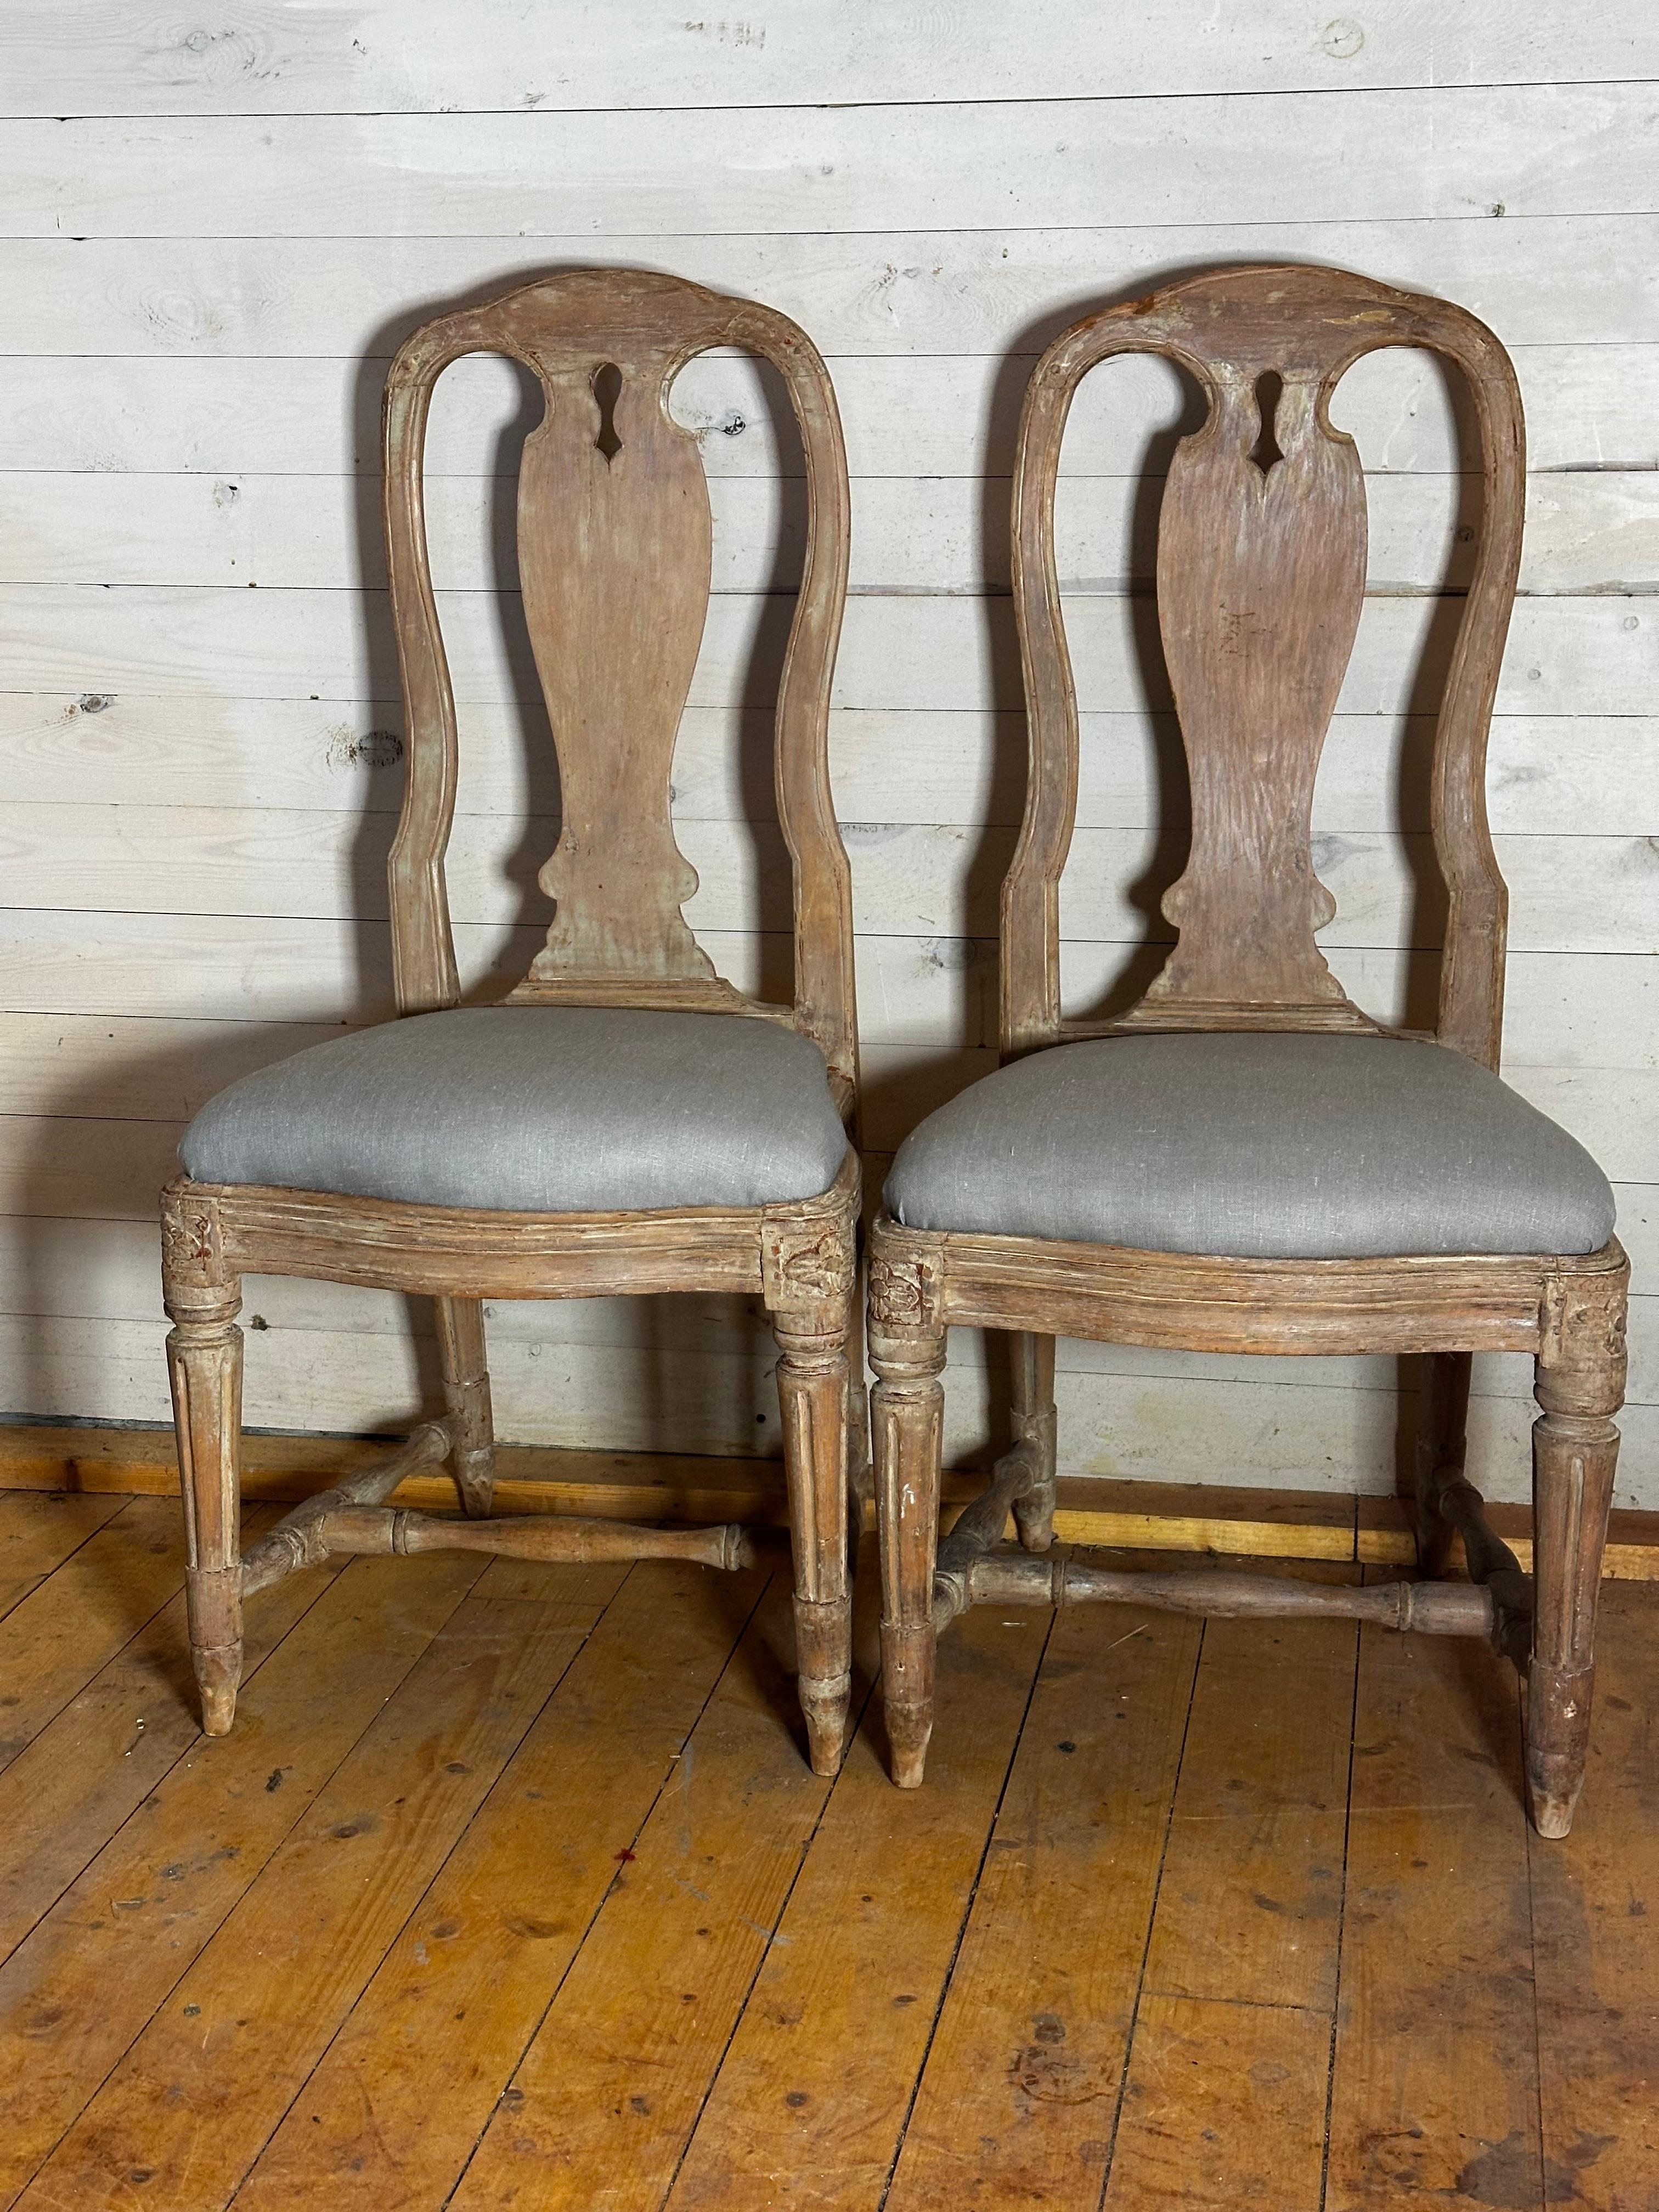 Late 18th Century Transition Chairs in Original Color  For Sale